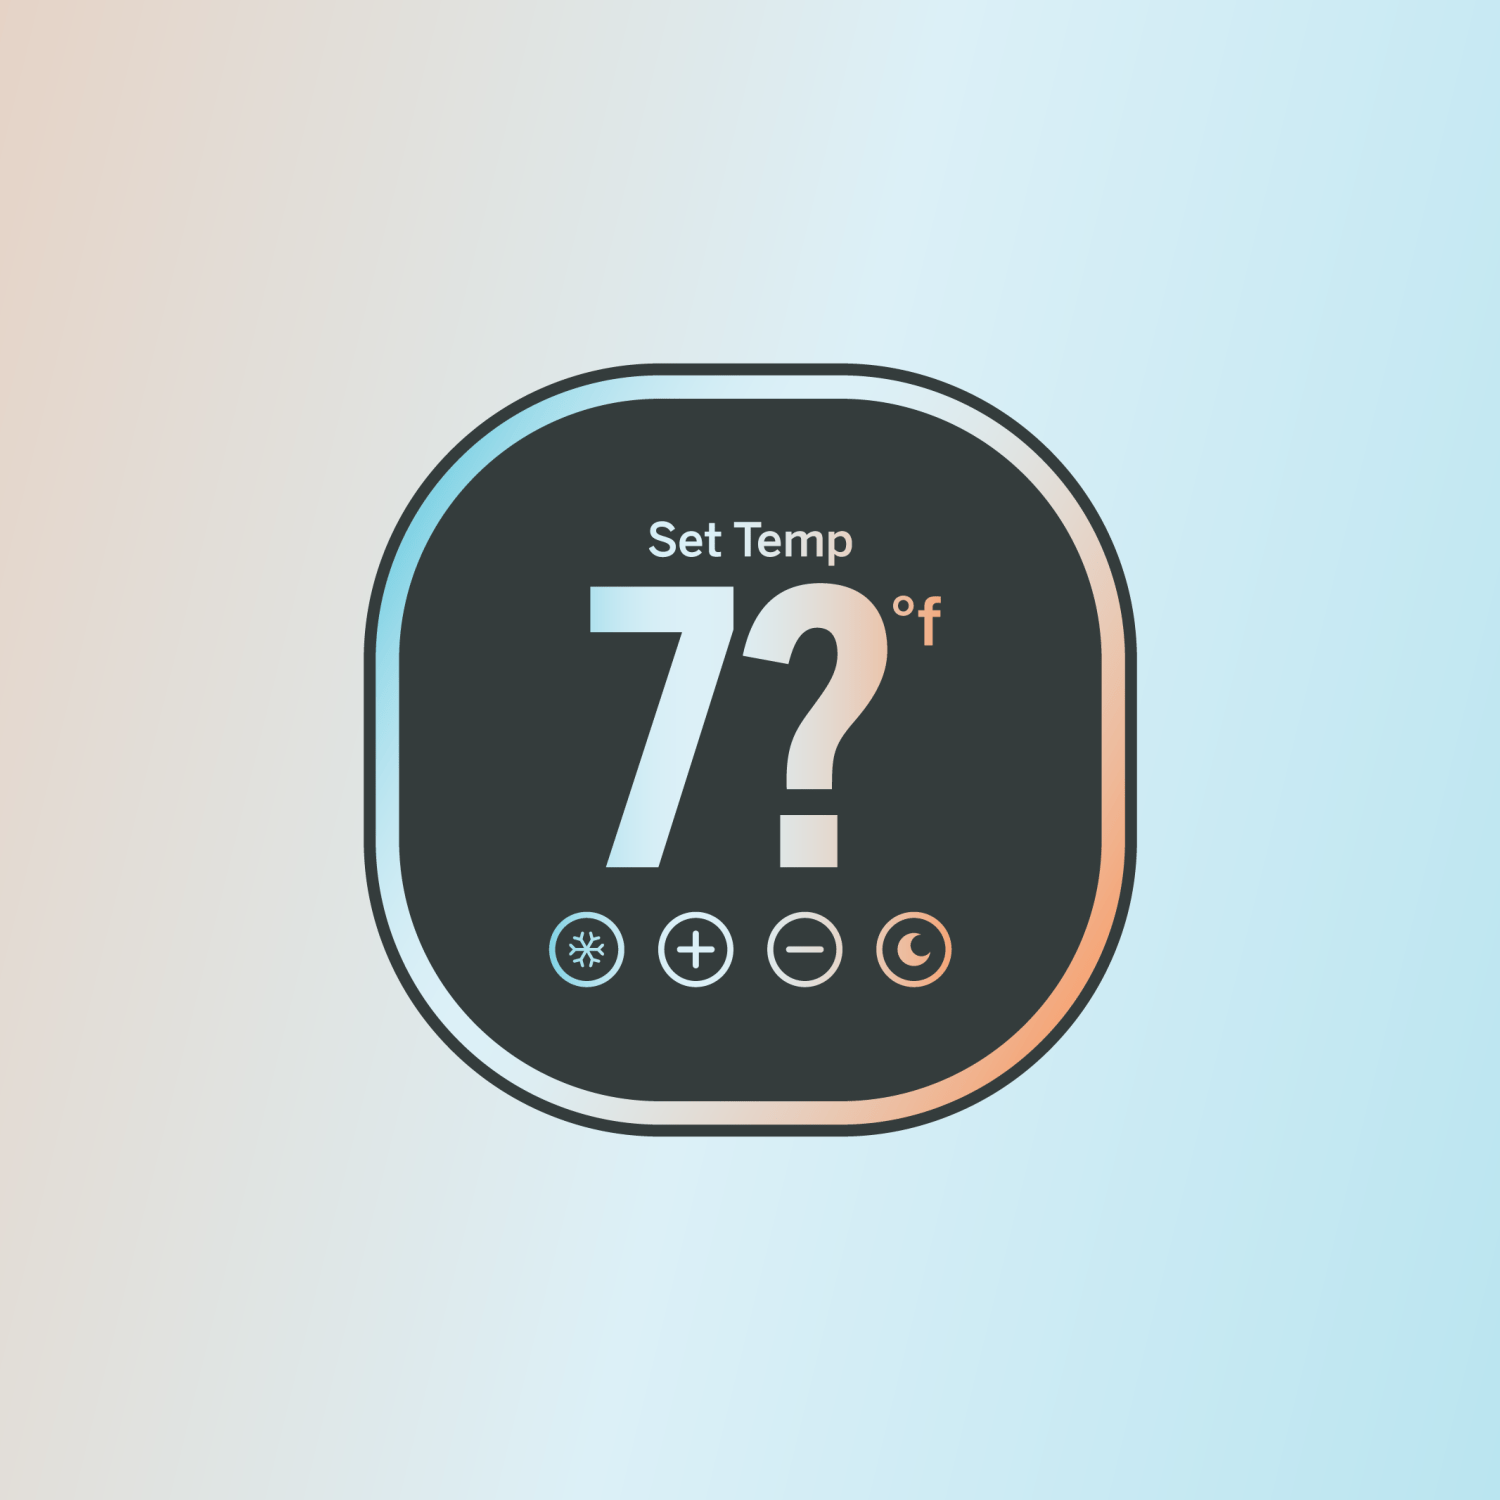 A visualization of a thermostat set to 78 degrees Fahrenheit, a typical recommendation during the summer months.